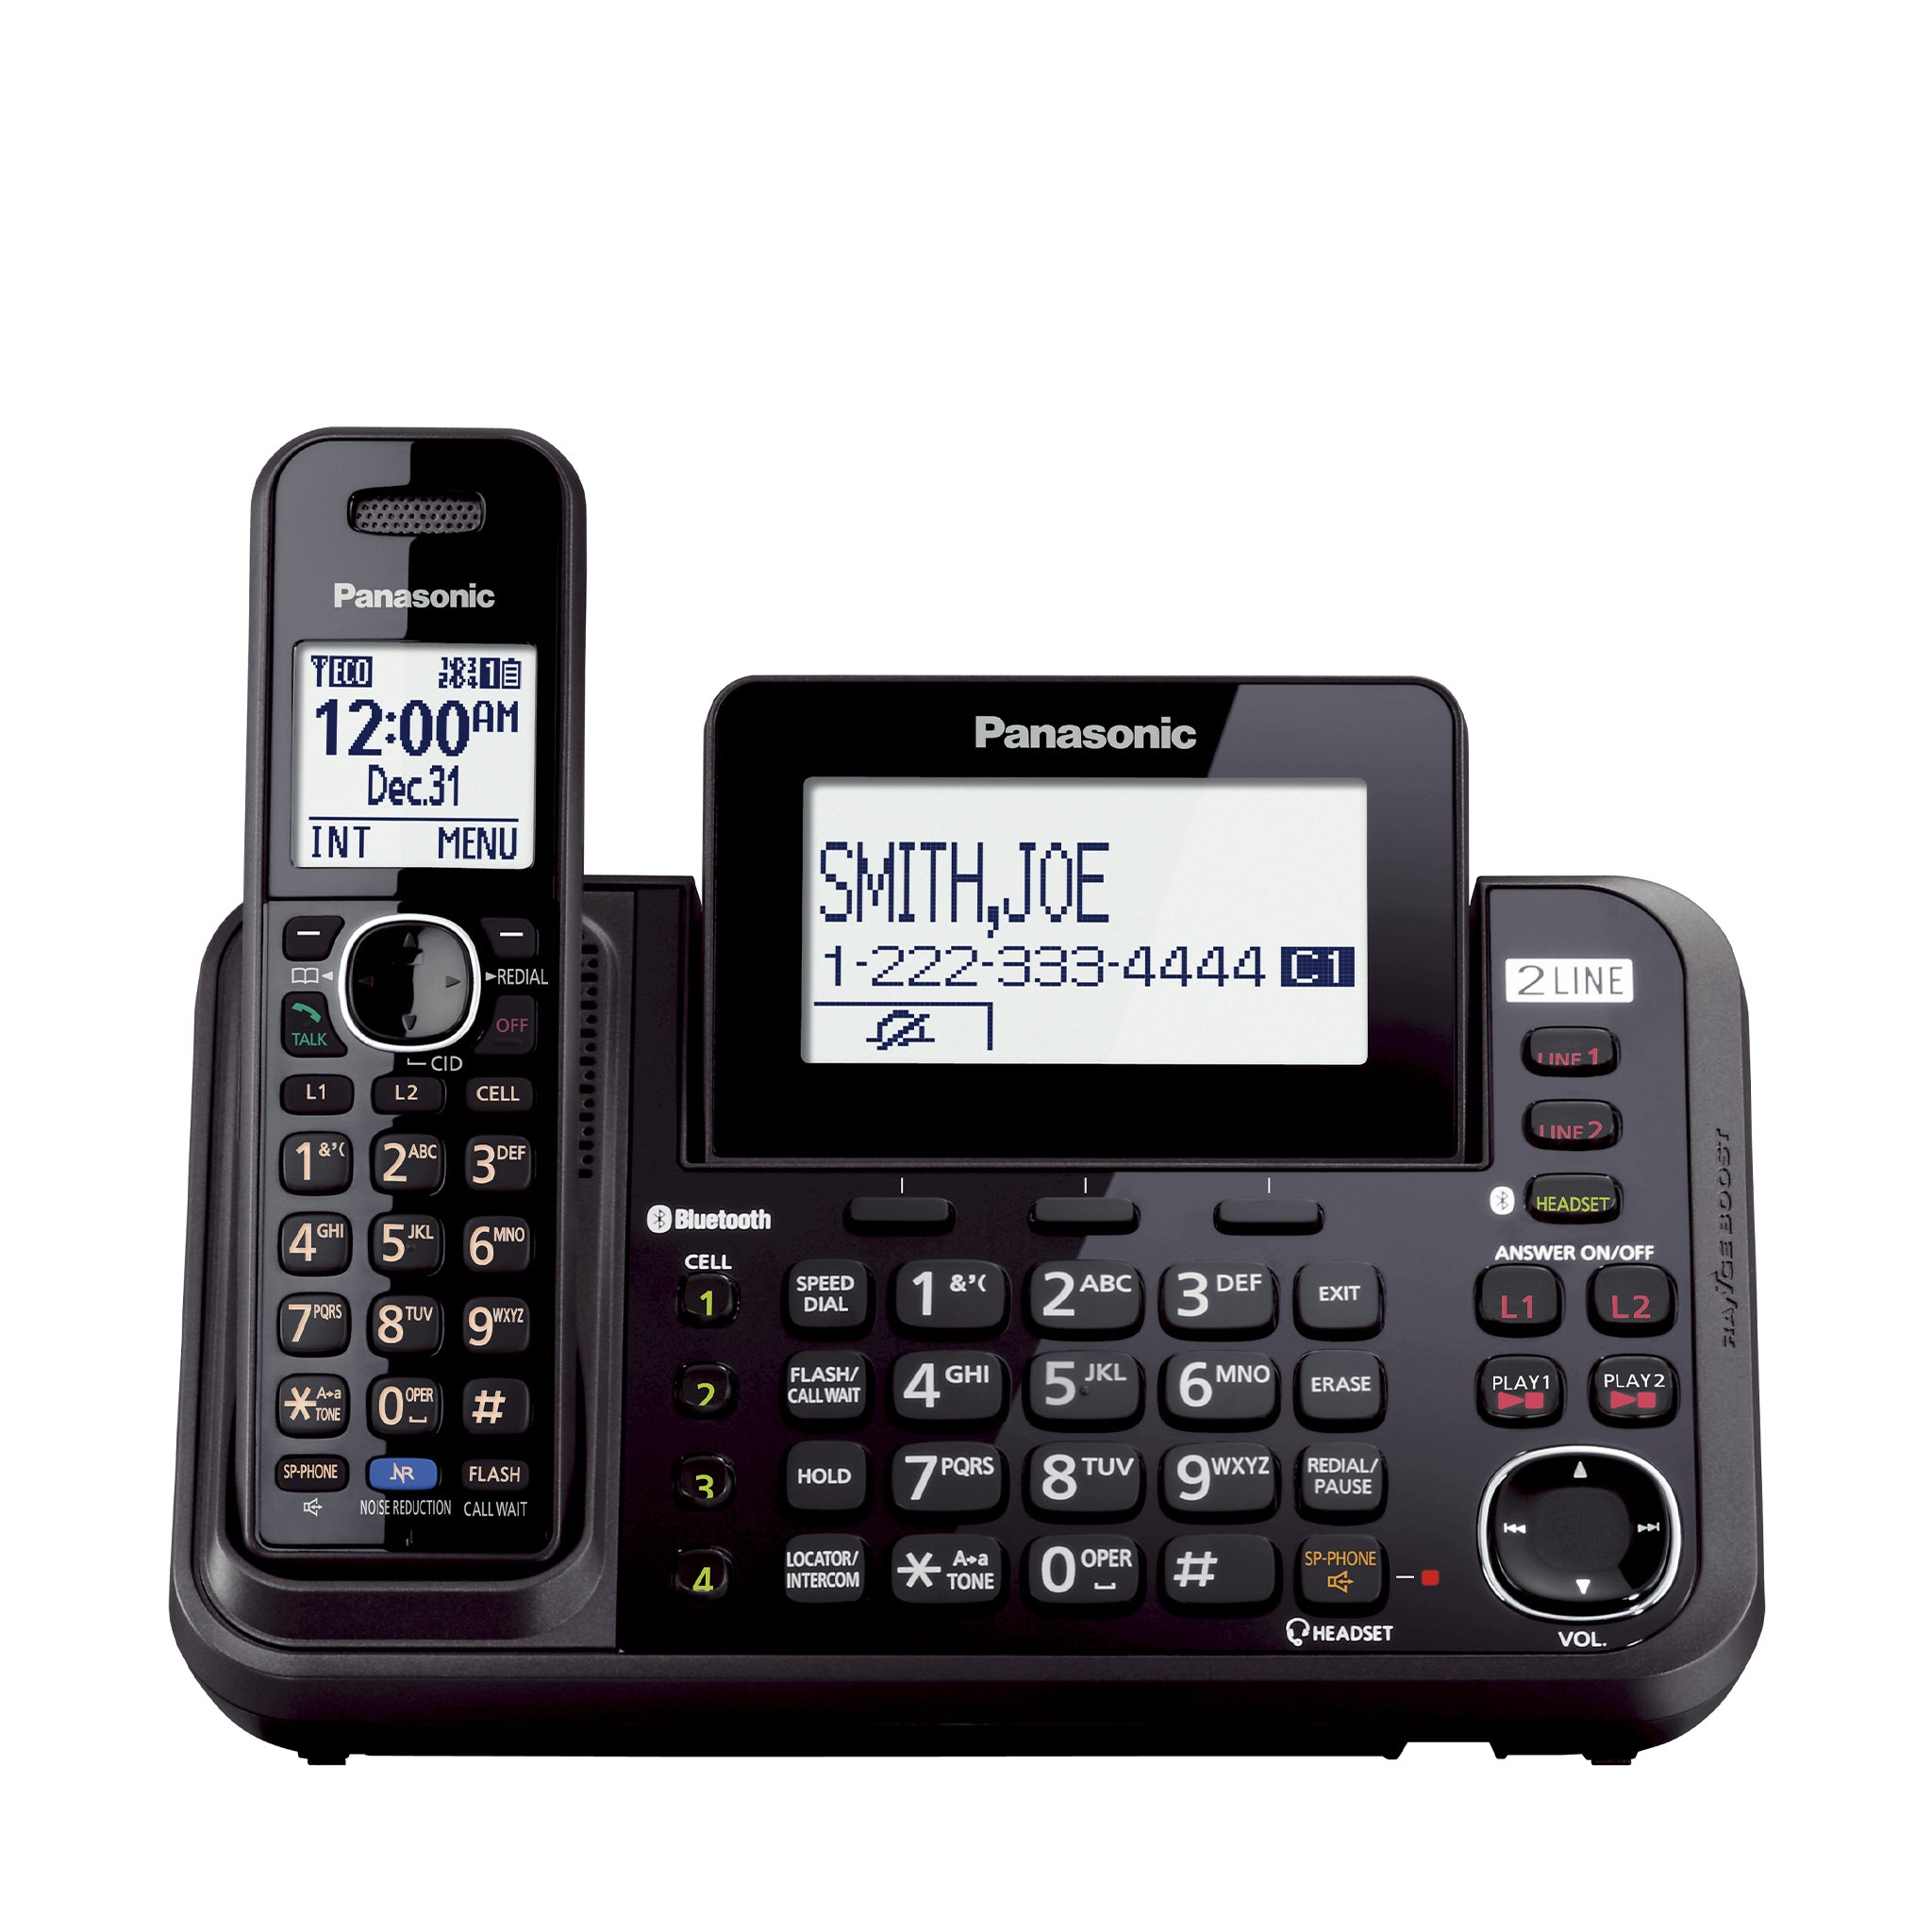 Link2Cell Cordless Phone - KX-TG954x Series